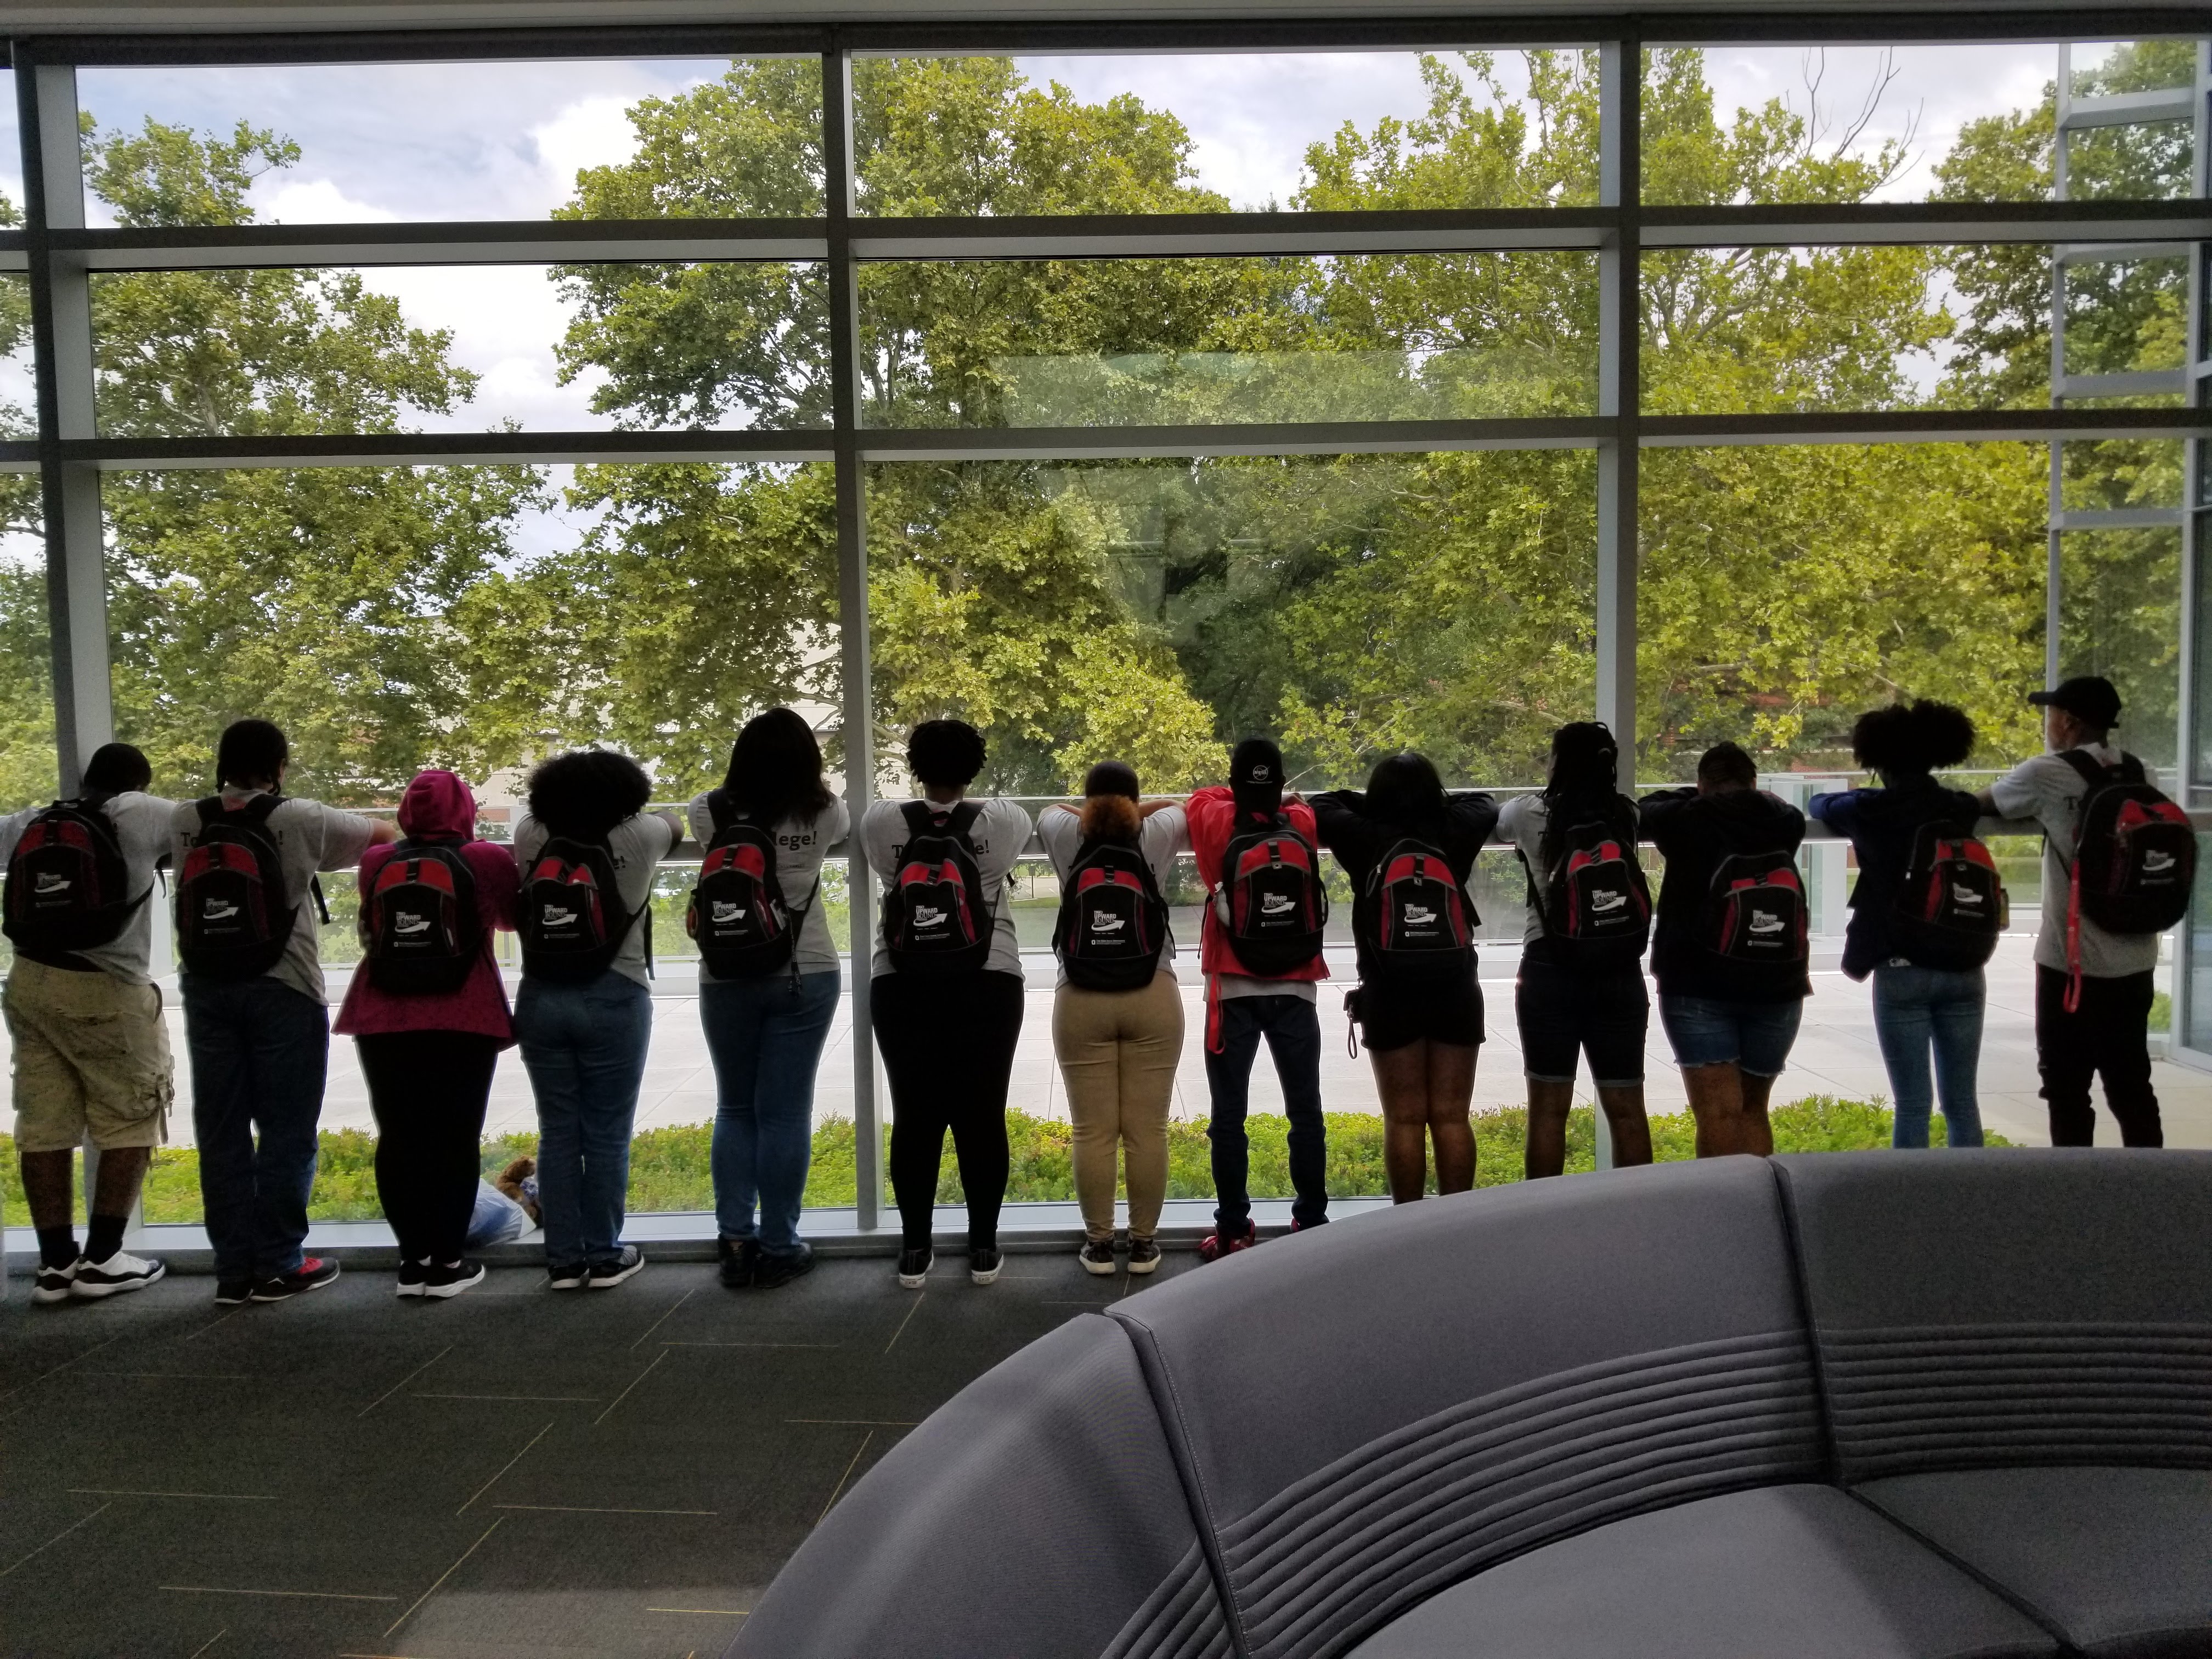 Upward Bound students outlined in front of a large glass window